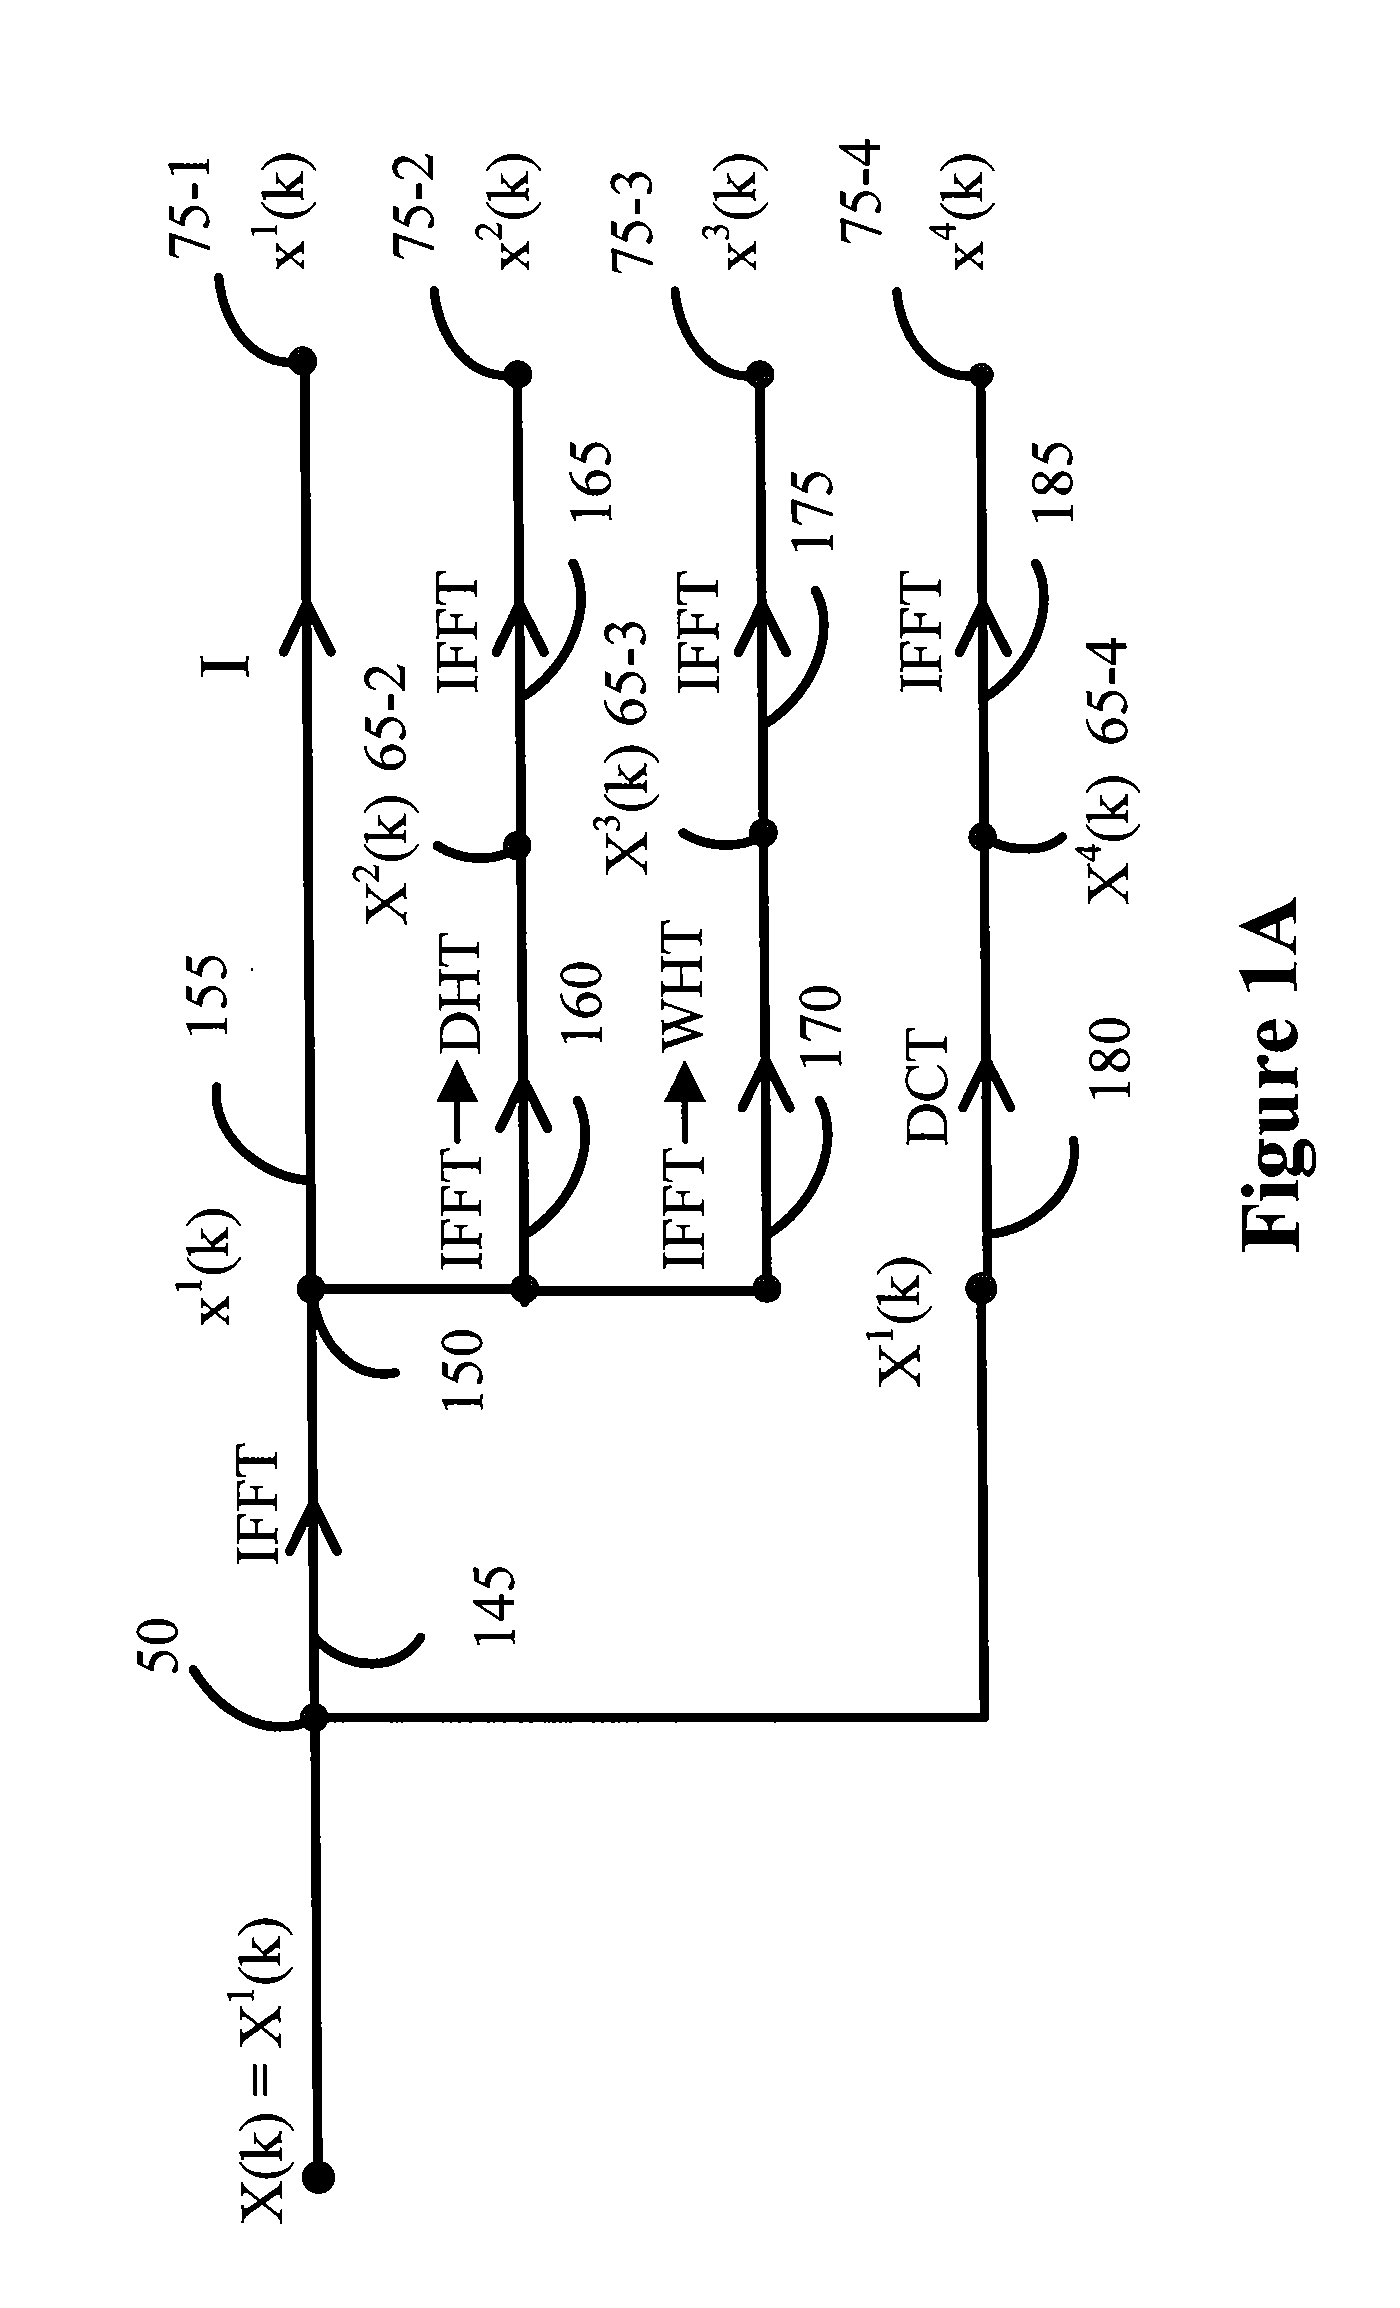 Multi transform OFDM systems and methods with low peak to average power ratio signals